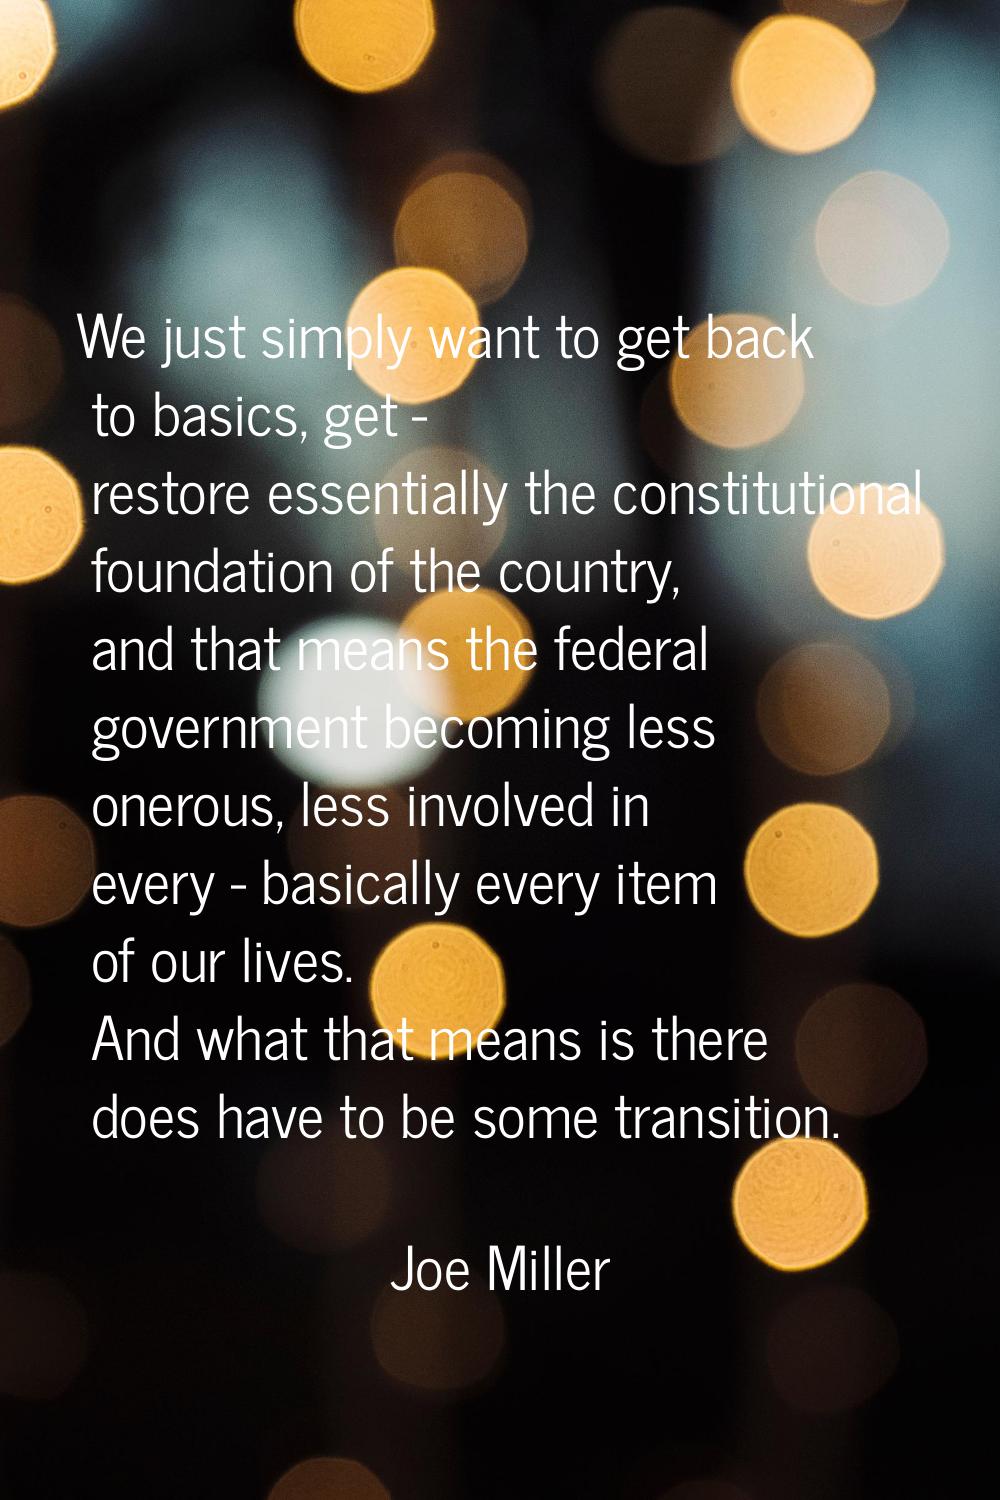 We just simply want to get back to basics, get - restore essentially the constitutional foundation 